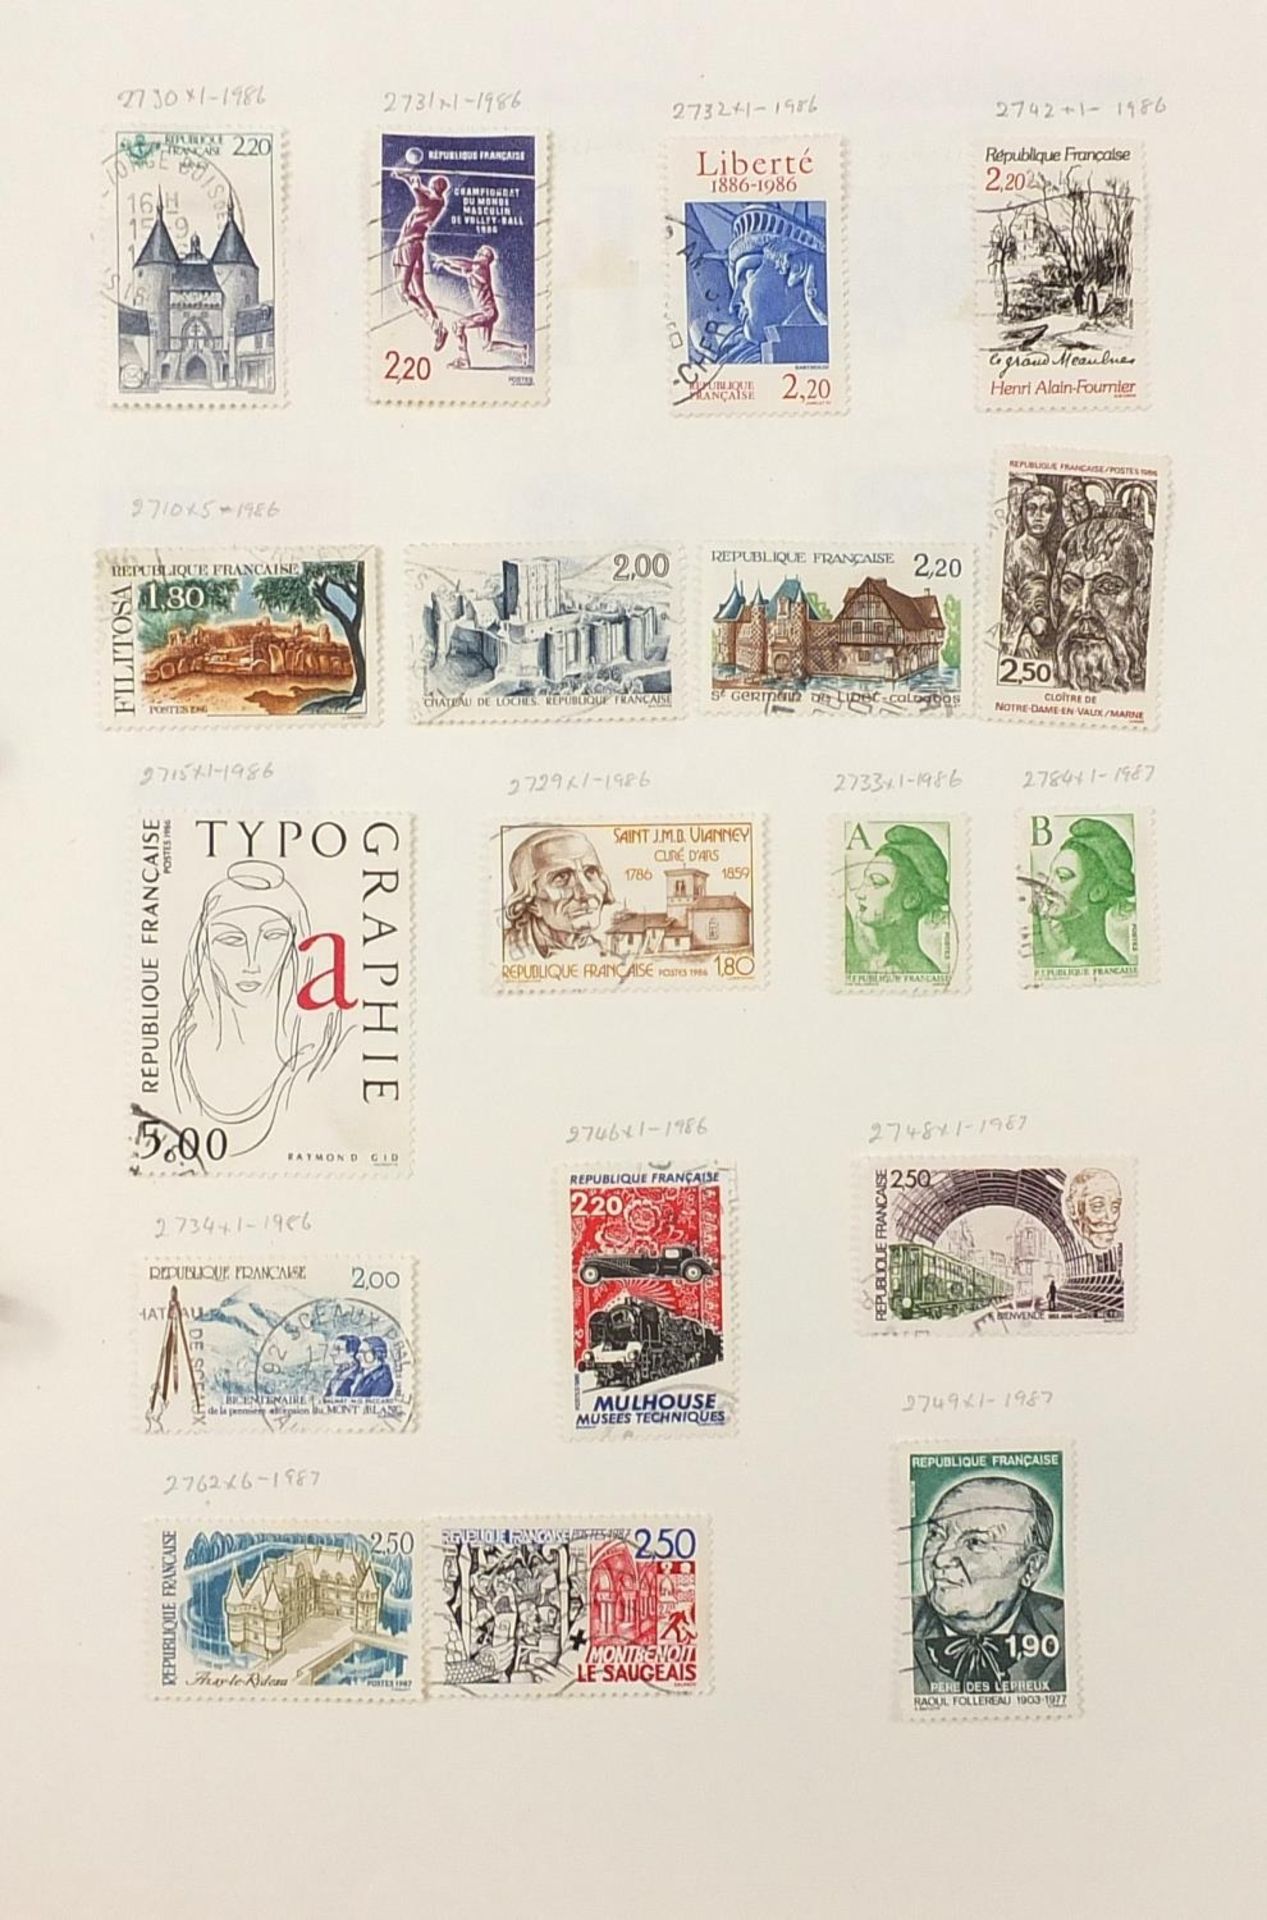 Extensive collection of antique and later world stamps arranged in albums including Brazil, - Image 12 of 52